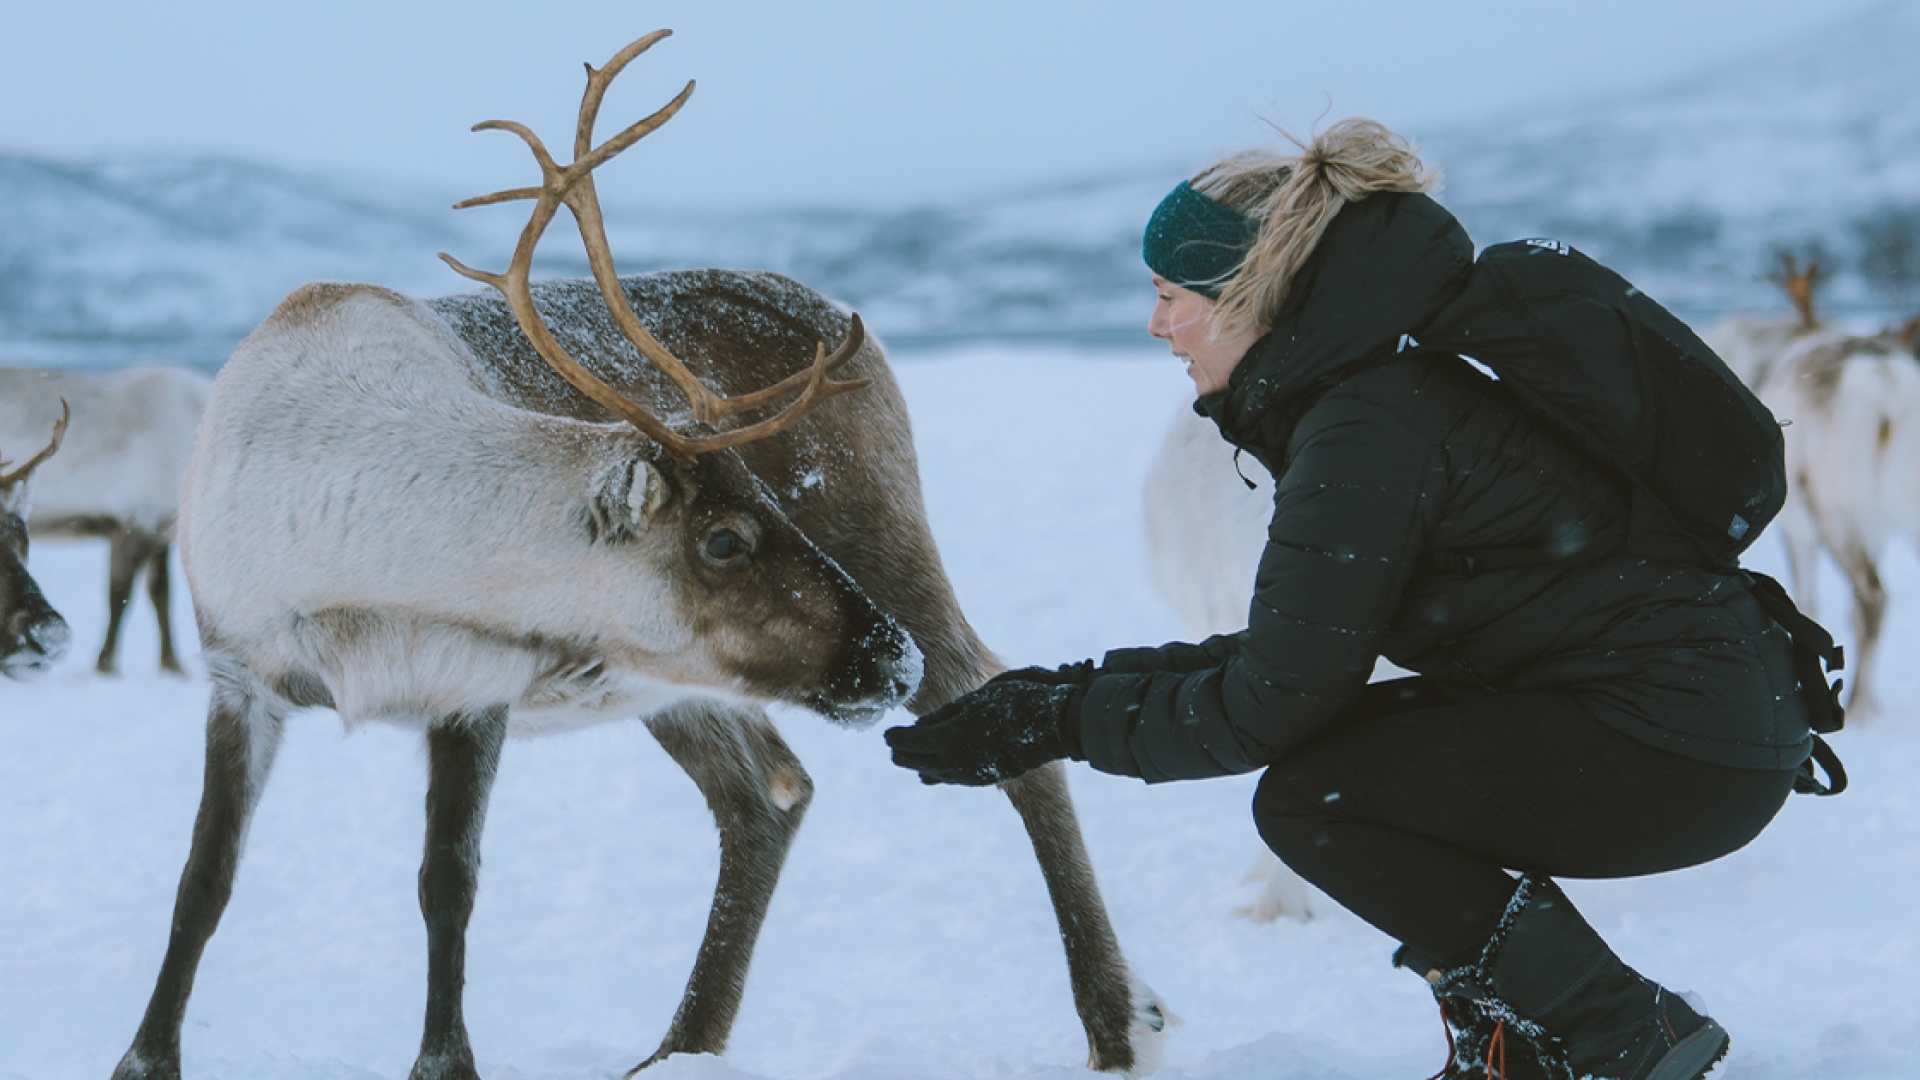 Experience the sami culture and history | Visit Tromso